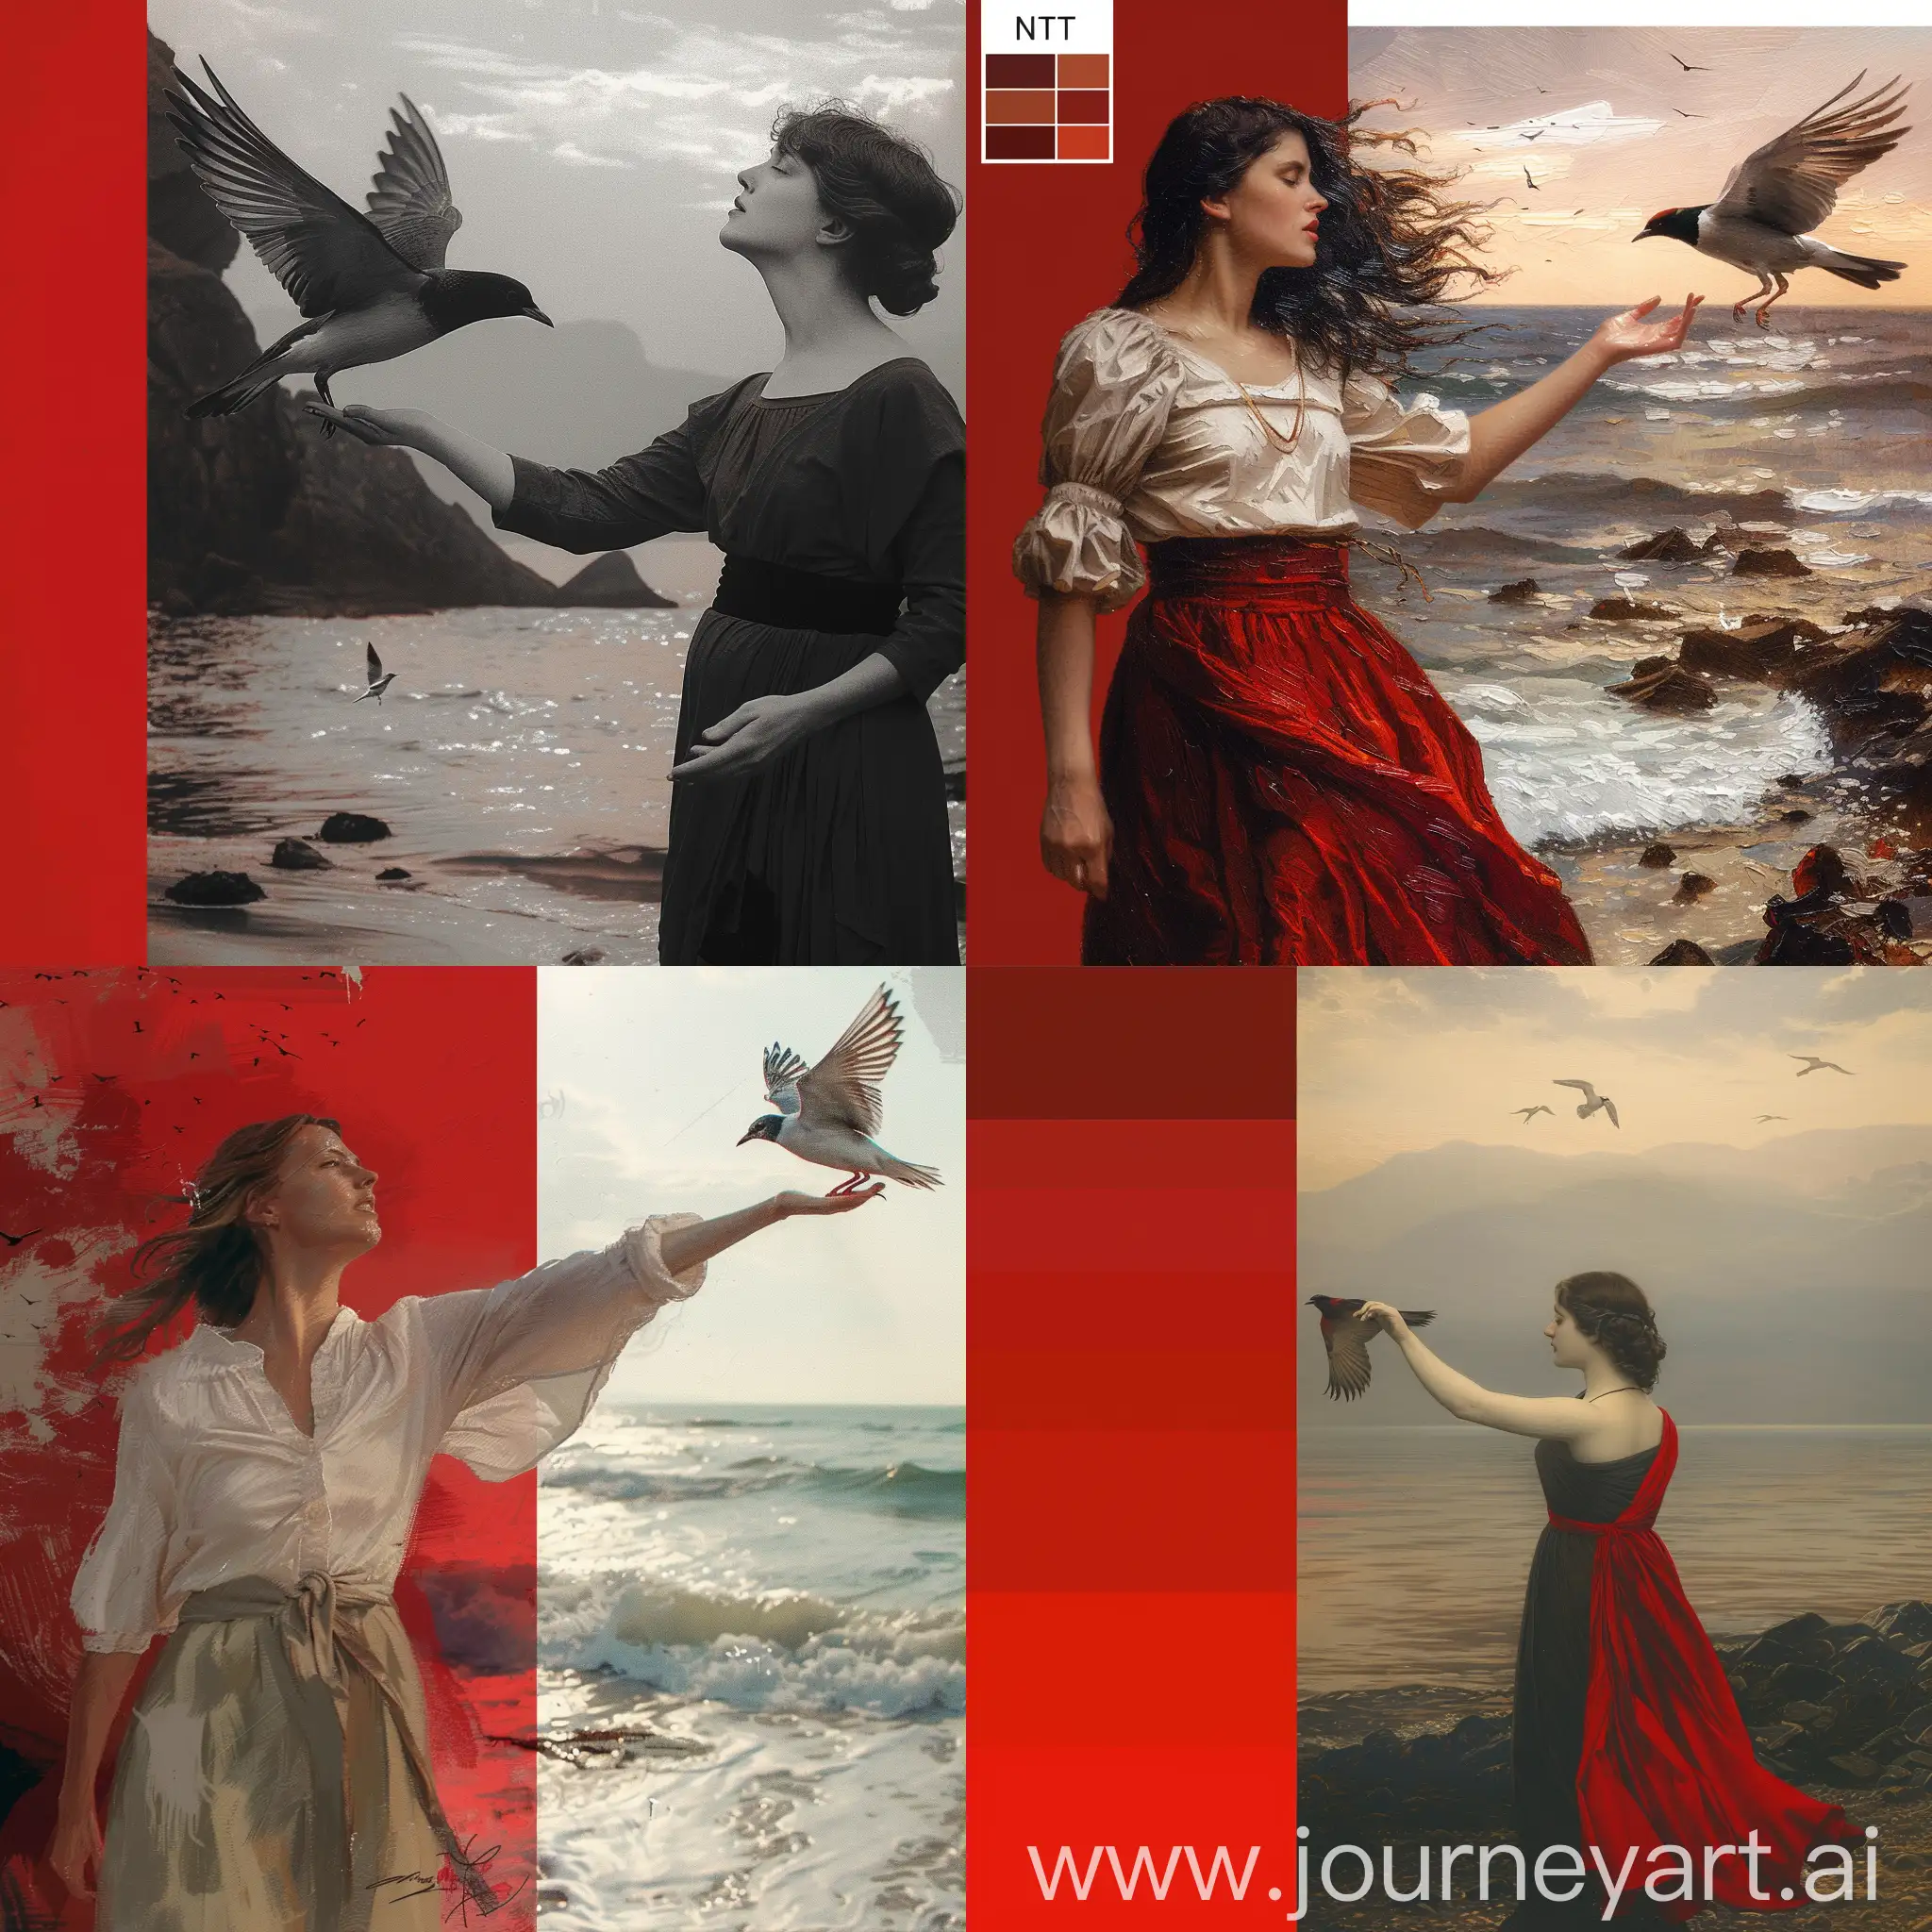 The type of image I have in mind is Portraits and Digital Paintings.  Description for the design I have in mind:  The image I have in mind for the NFT is of a woman standing by the sea, releasing a bird from her hand, symbolizing power, freedom, and independence of a woman. Considering that my target audience is women seeking inspiration, enthusiasm, and independence, as well as young individuals and generations who have grown up in the digital culture and are active in the field of women’s rights.  The color palette I have in mind for this design includes the following:  Bright Red:  HEX code: 